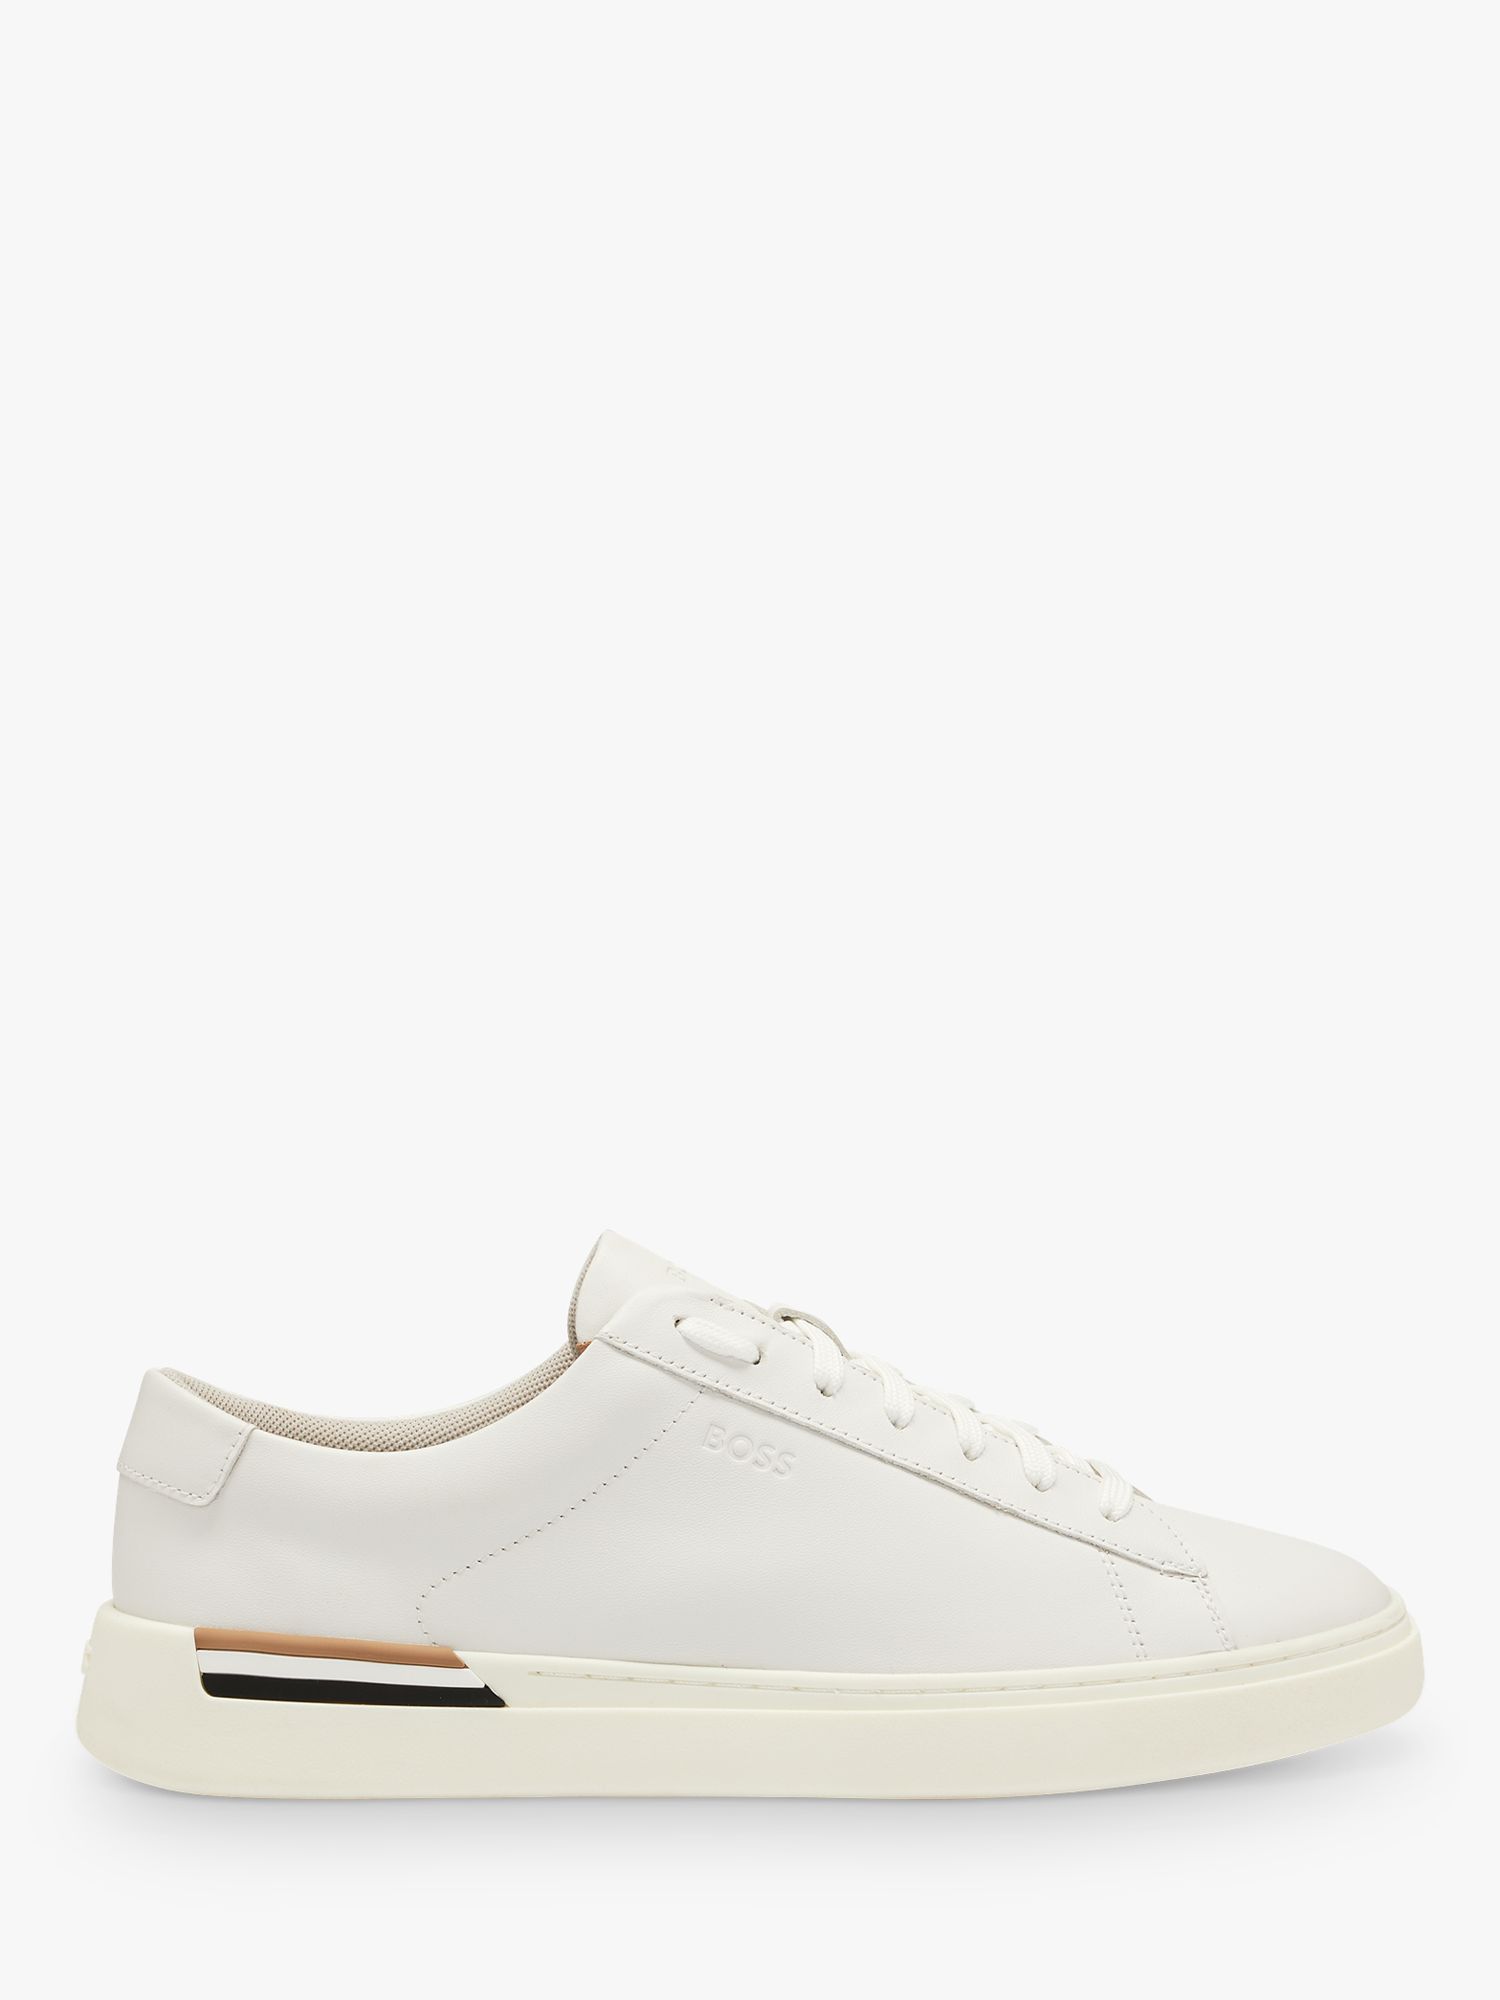 BOSS Clint Lace Up Trainers, White at John Lewis & Partners